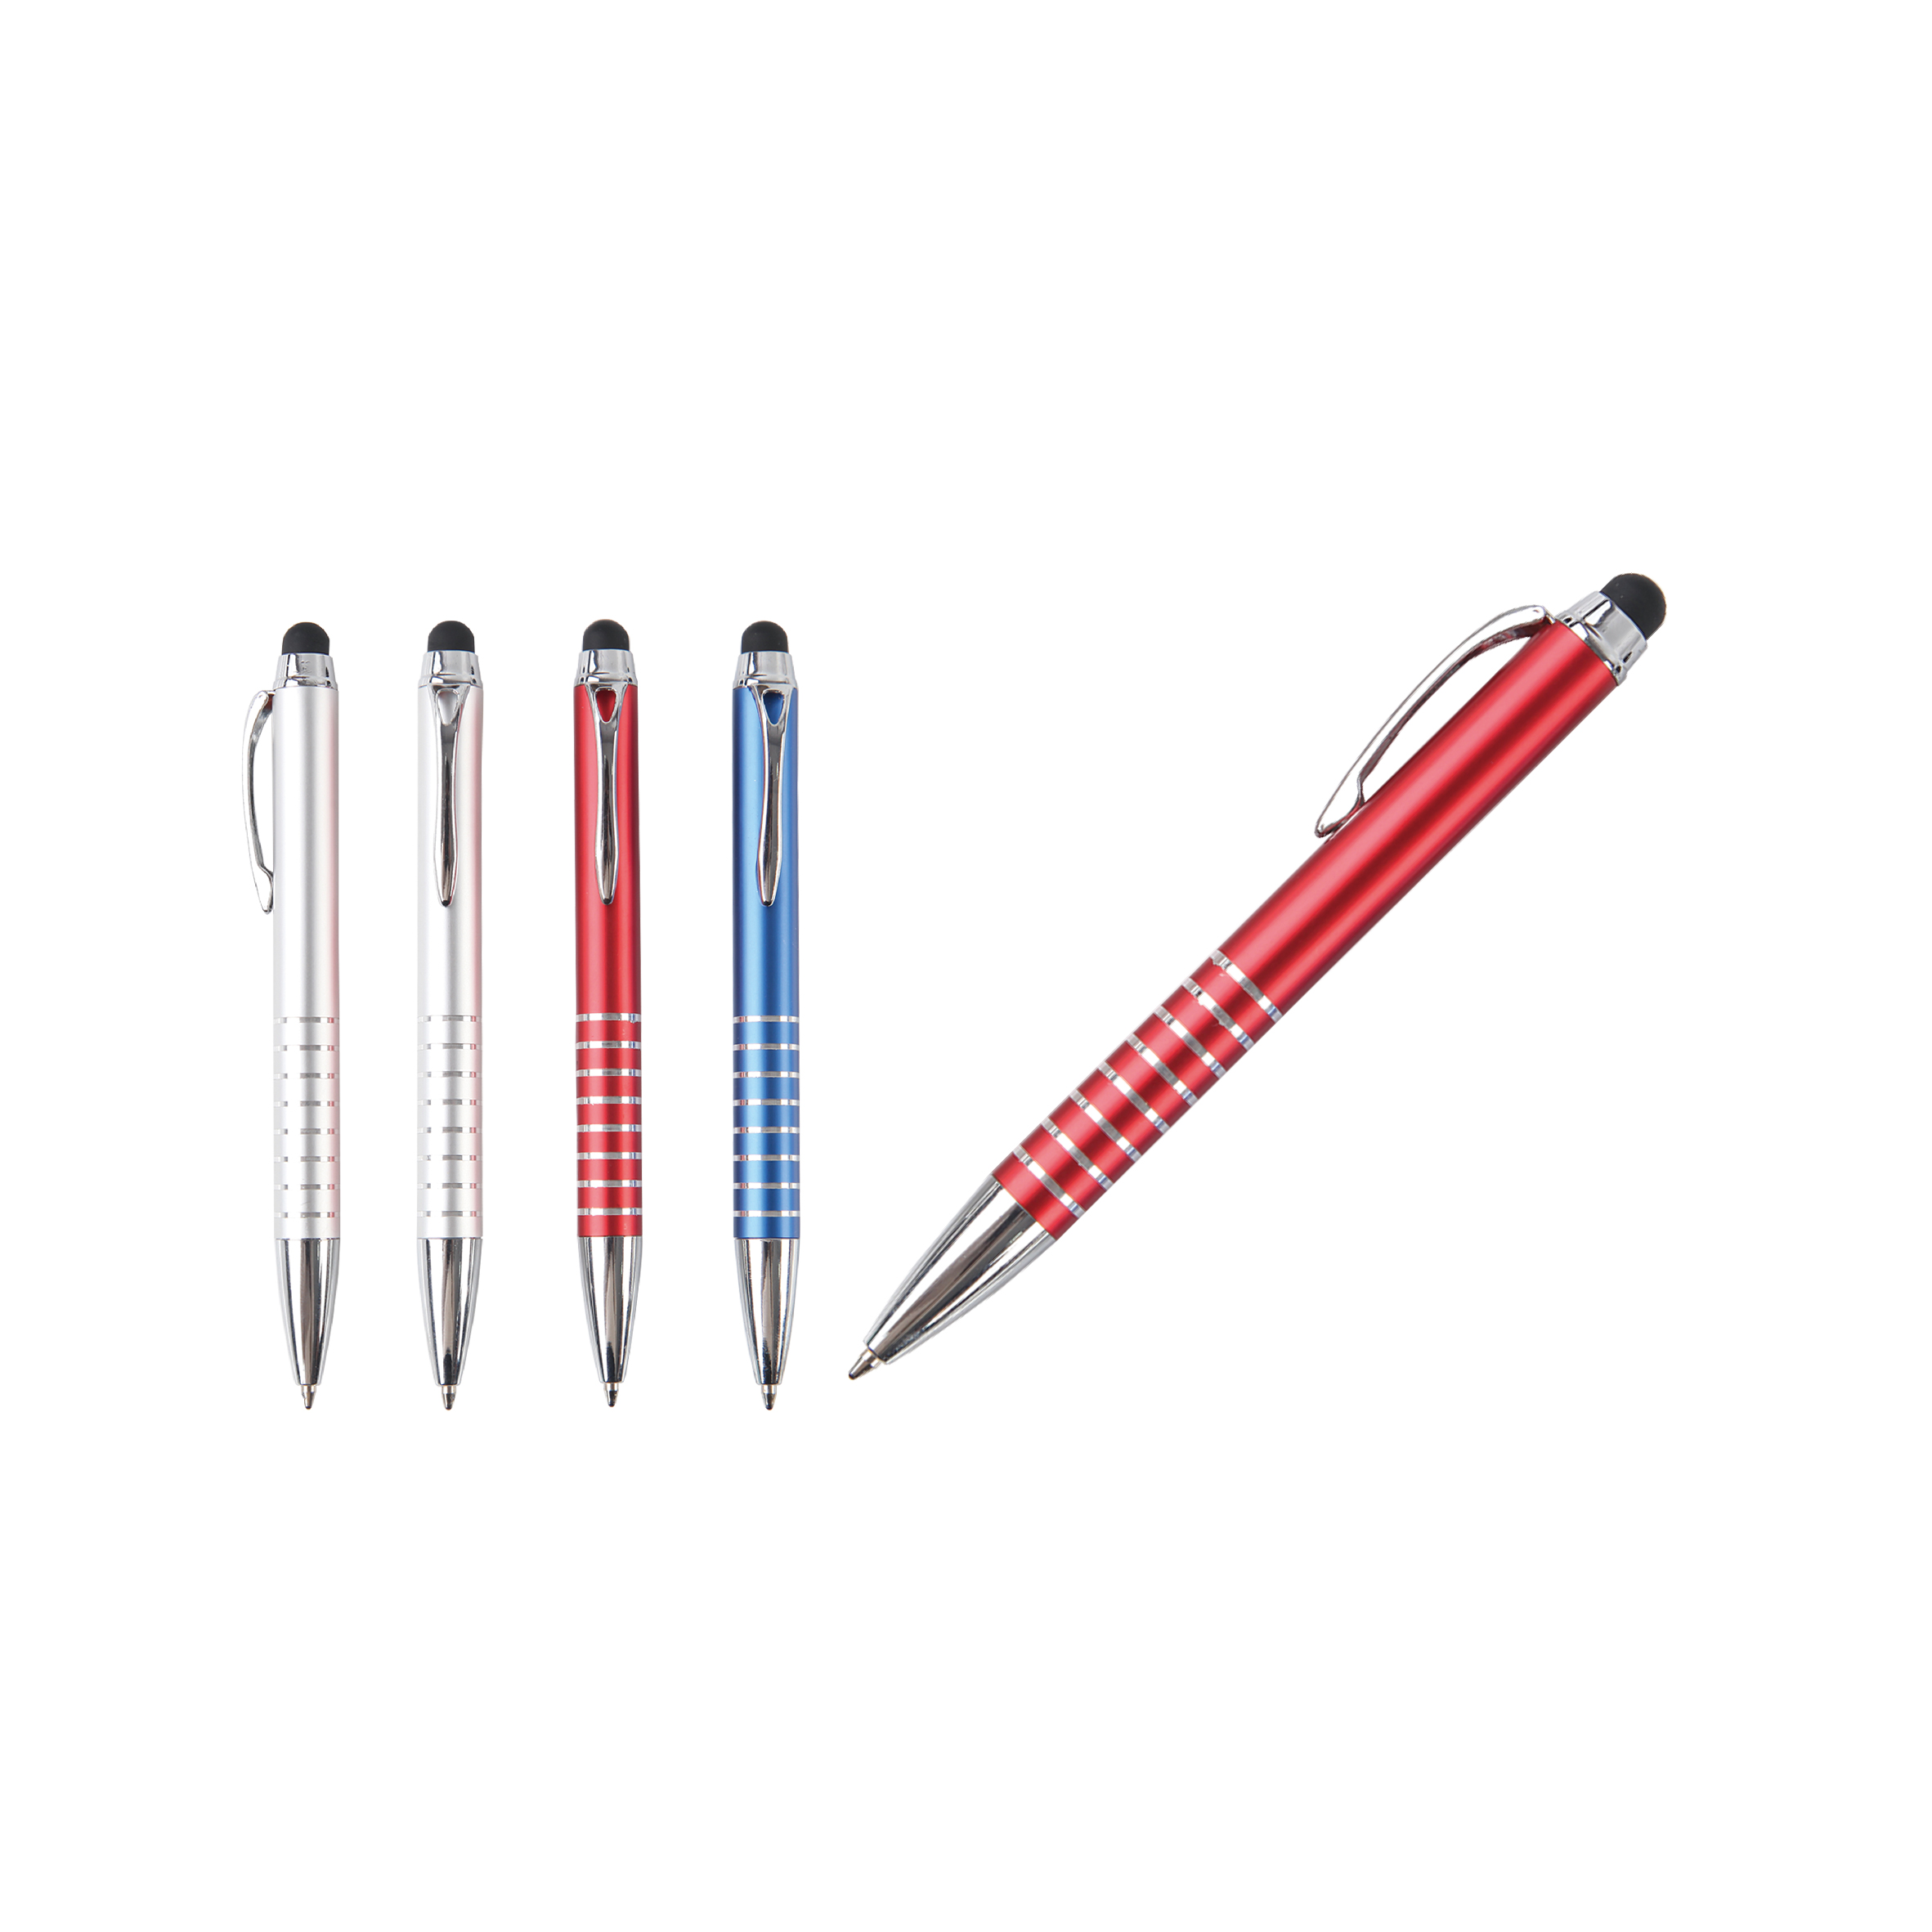 Dual Tip Twistable Metal Ball Pen With Stylus On Top,0.7mm/1.0mm